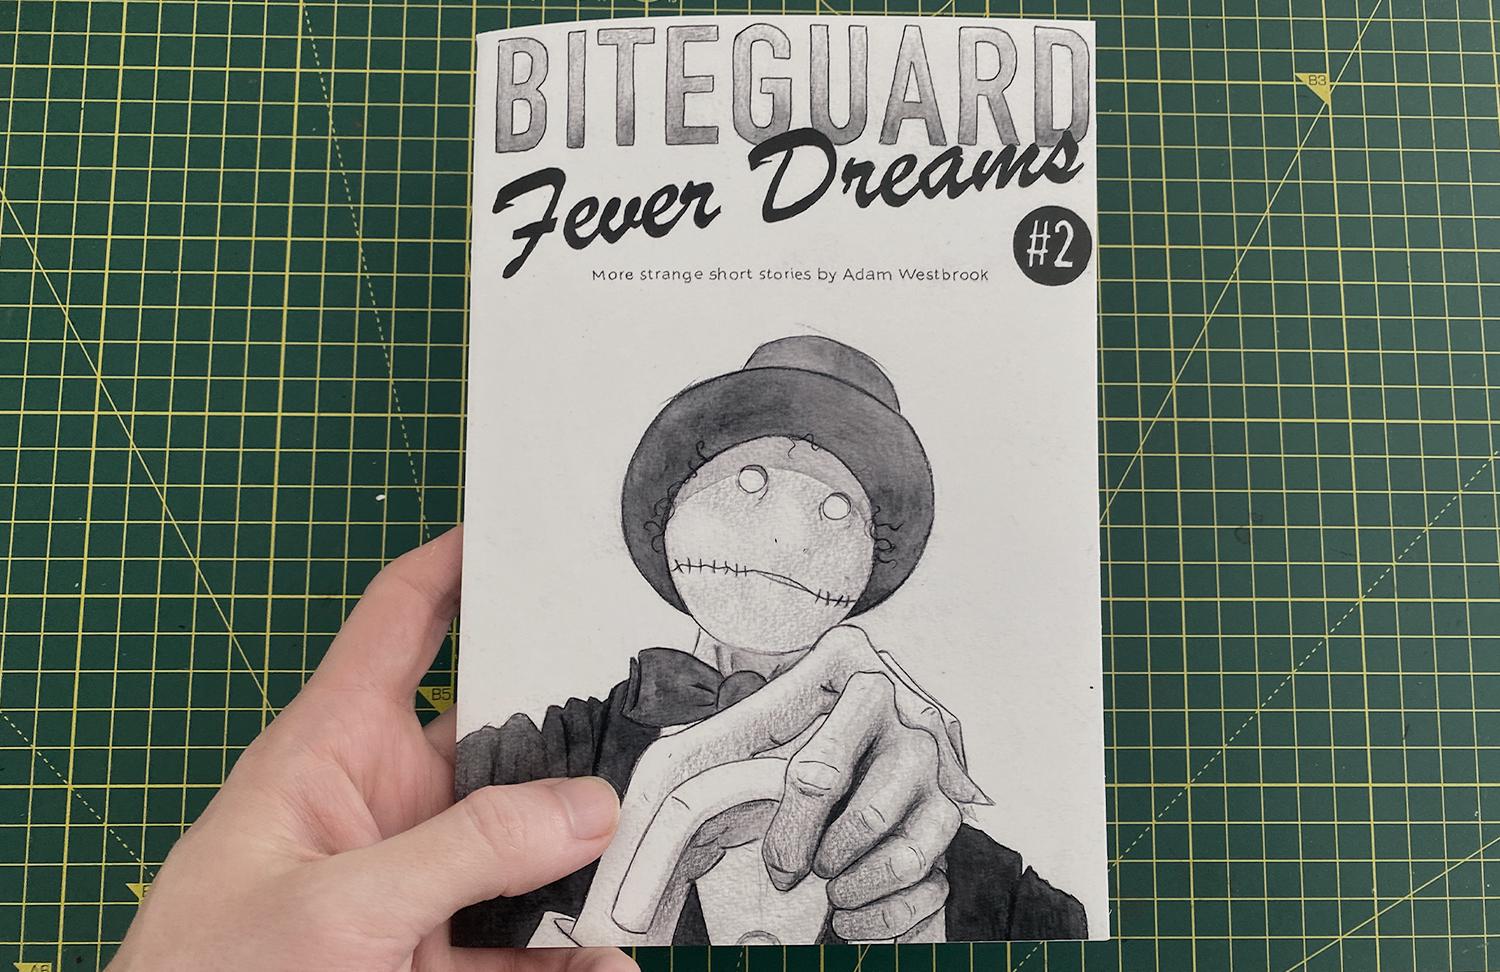 The front cover of Biteguard Fever Dreams 2 by Adam Westbrook